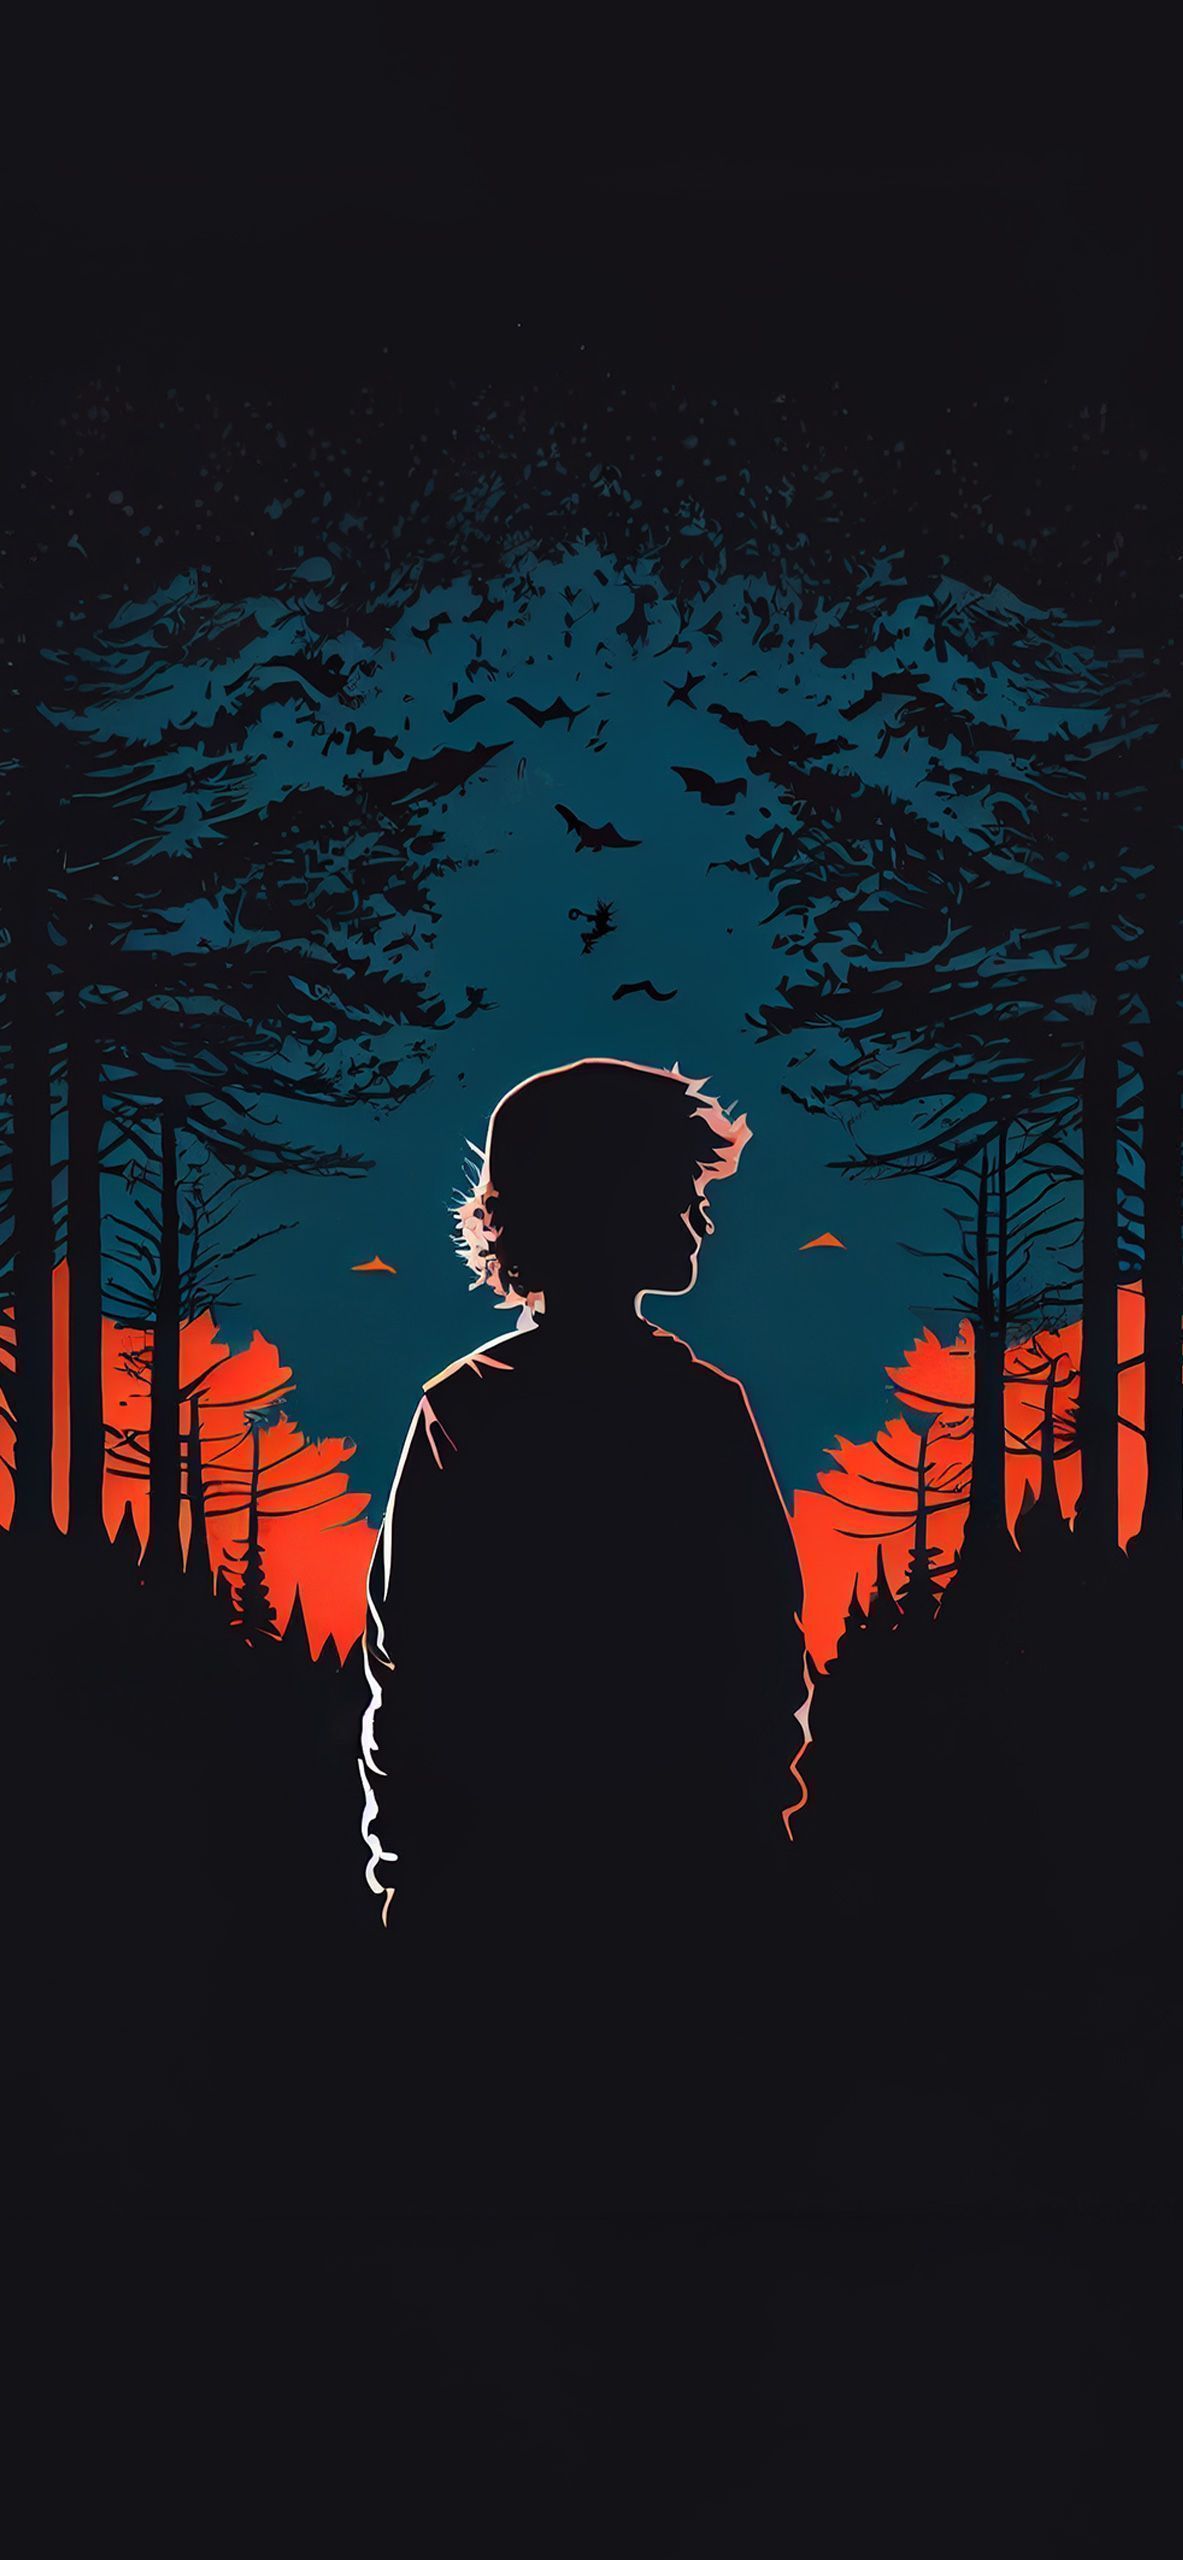 The poster for a movie called stranger things - Dark, cool, Game Boy, Stranger Things, forest